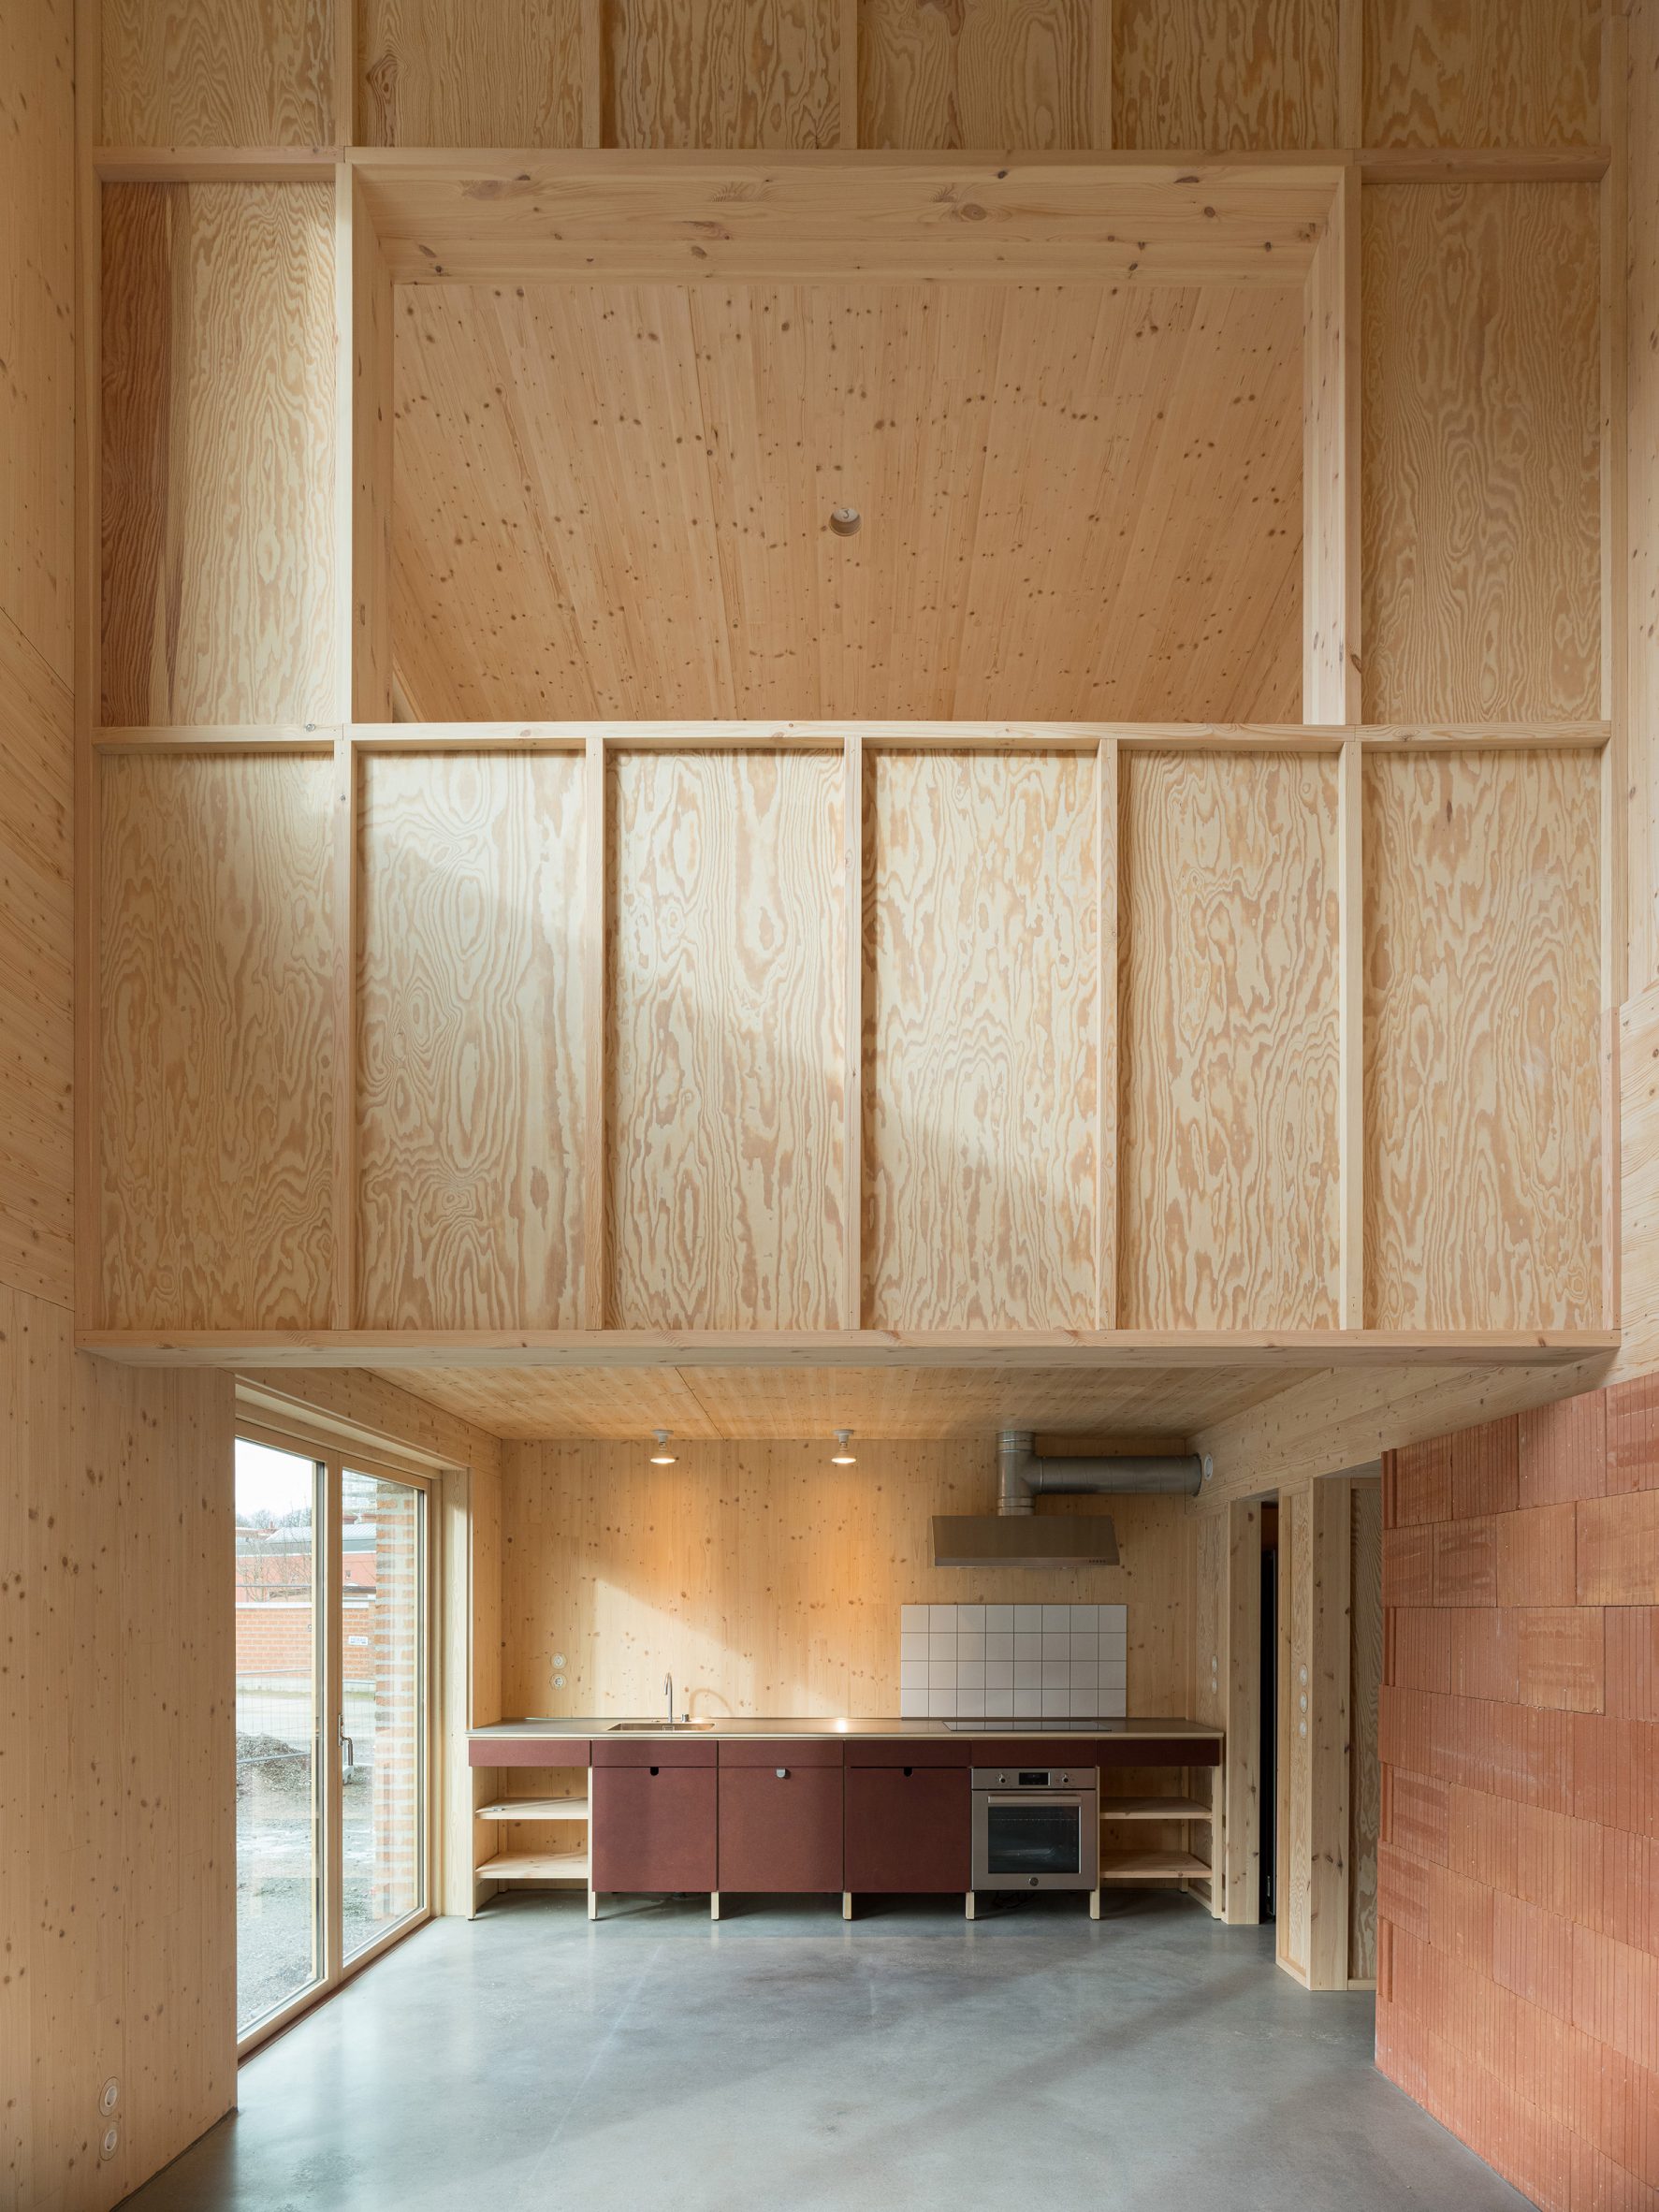 Interior image of the timber-lined living spaces at Twelve Houses